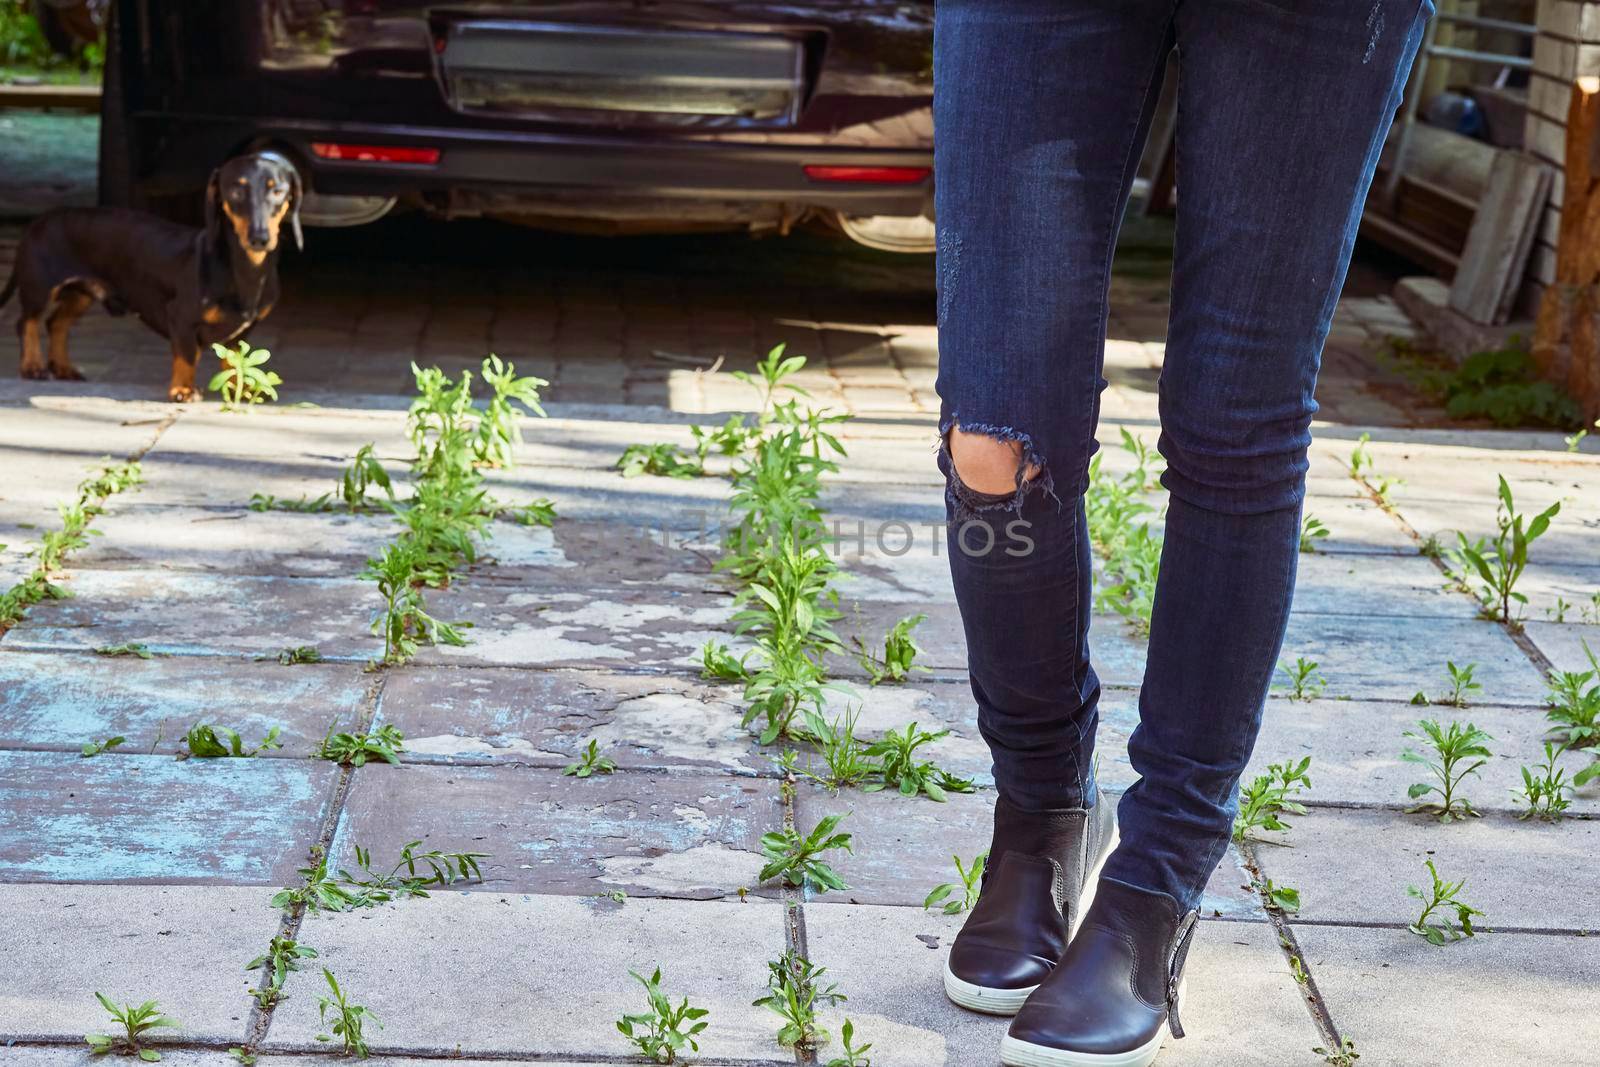 hard-wearing trousers made of denim or other cotton fabric, for informal wear. Female legs in torn jeans in a yard overgrown with weeds and a dachshund dog.